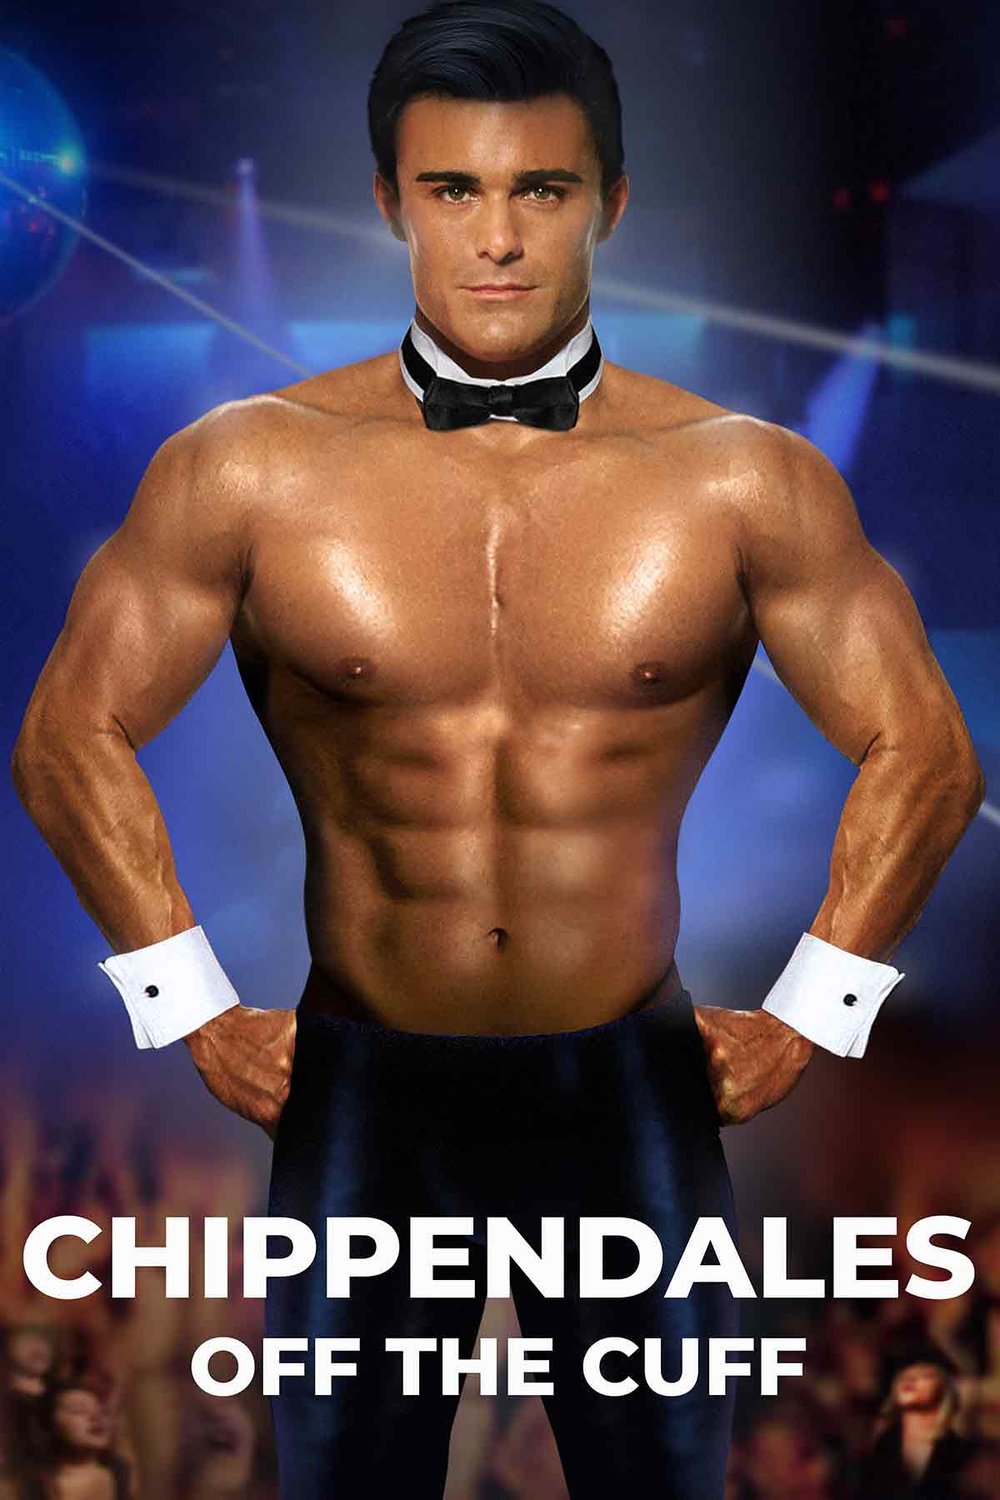 Poster of the movie Chippendales Off the Cuff